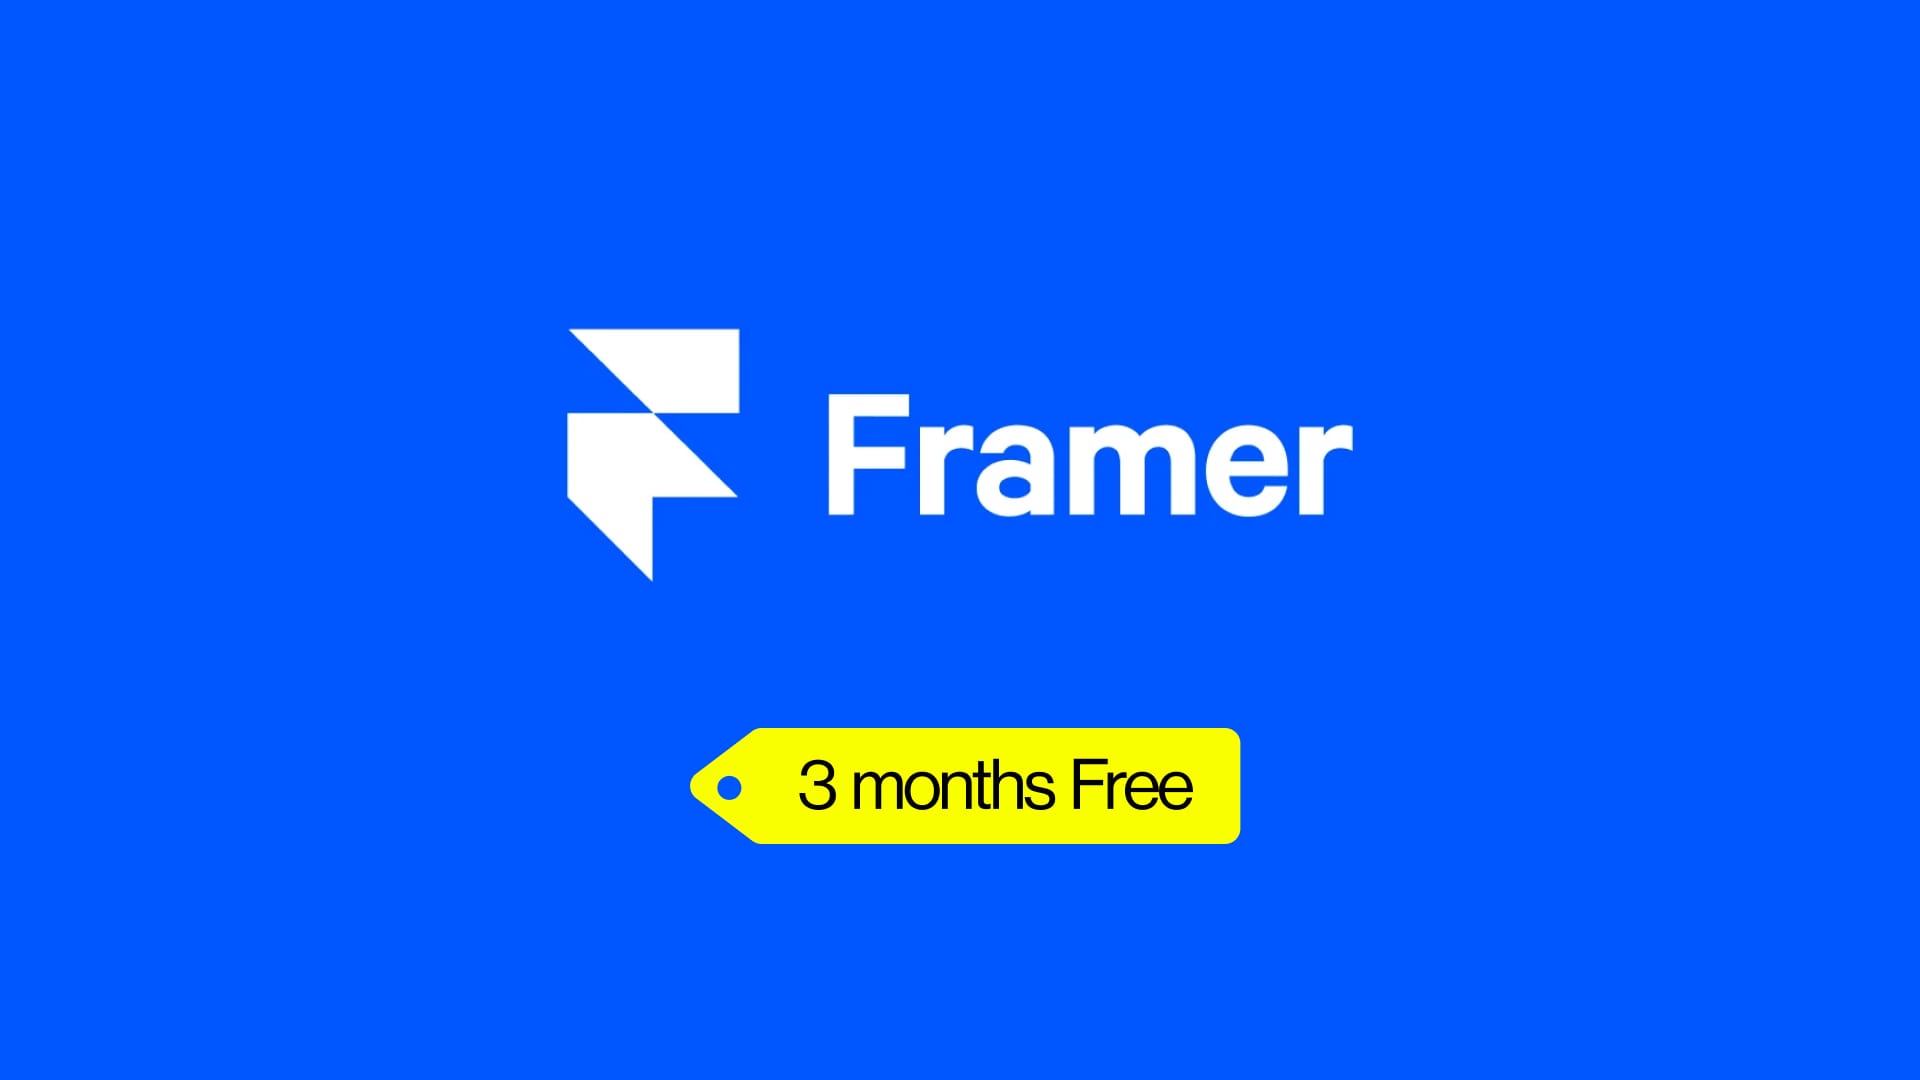 Special Offer: Framer — Get 3 Free Months on a Pro Annual Subscription